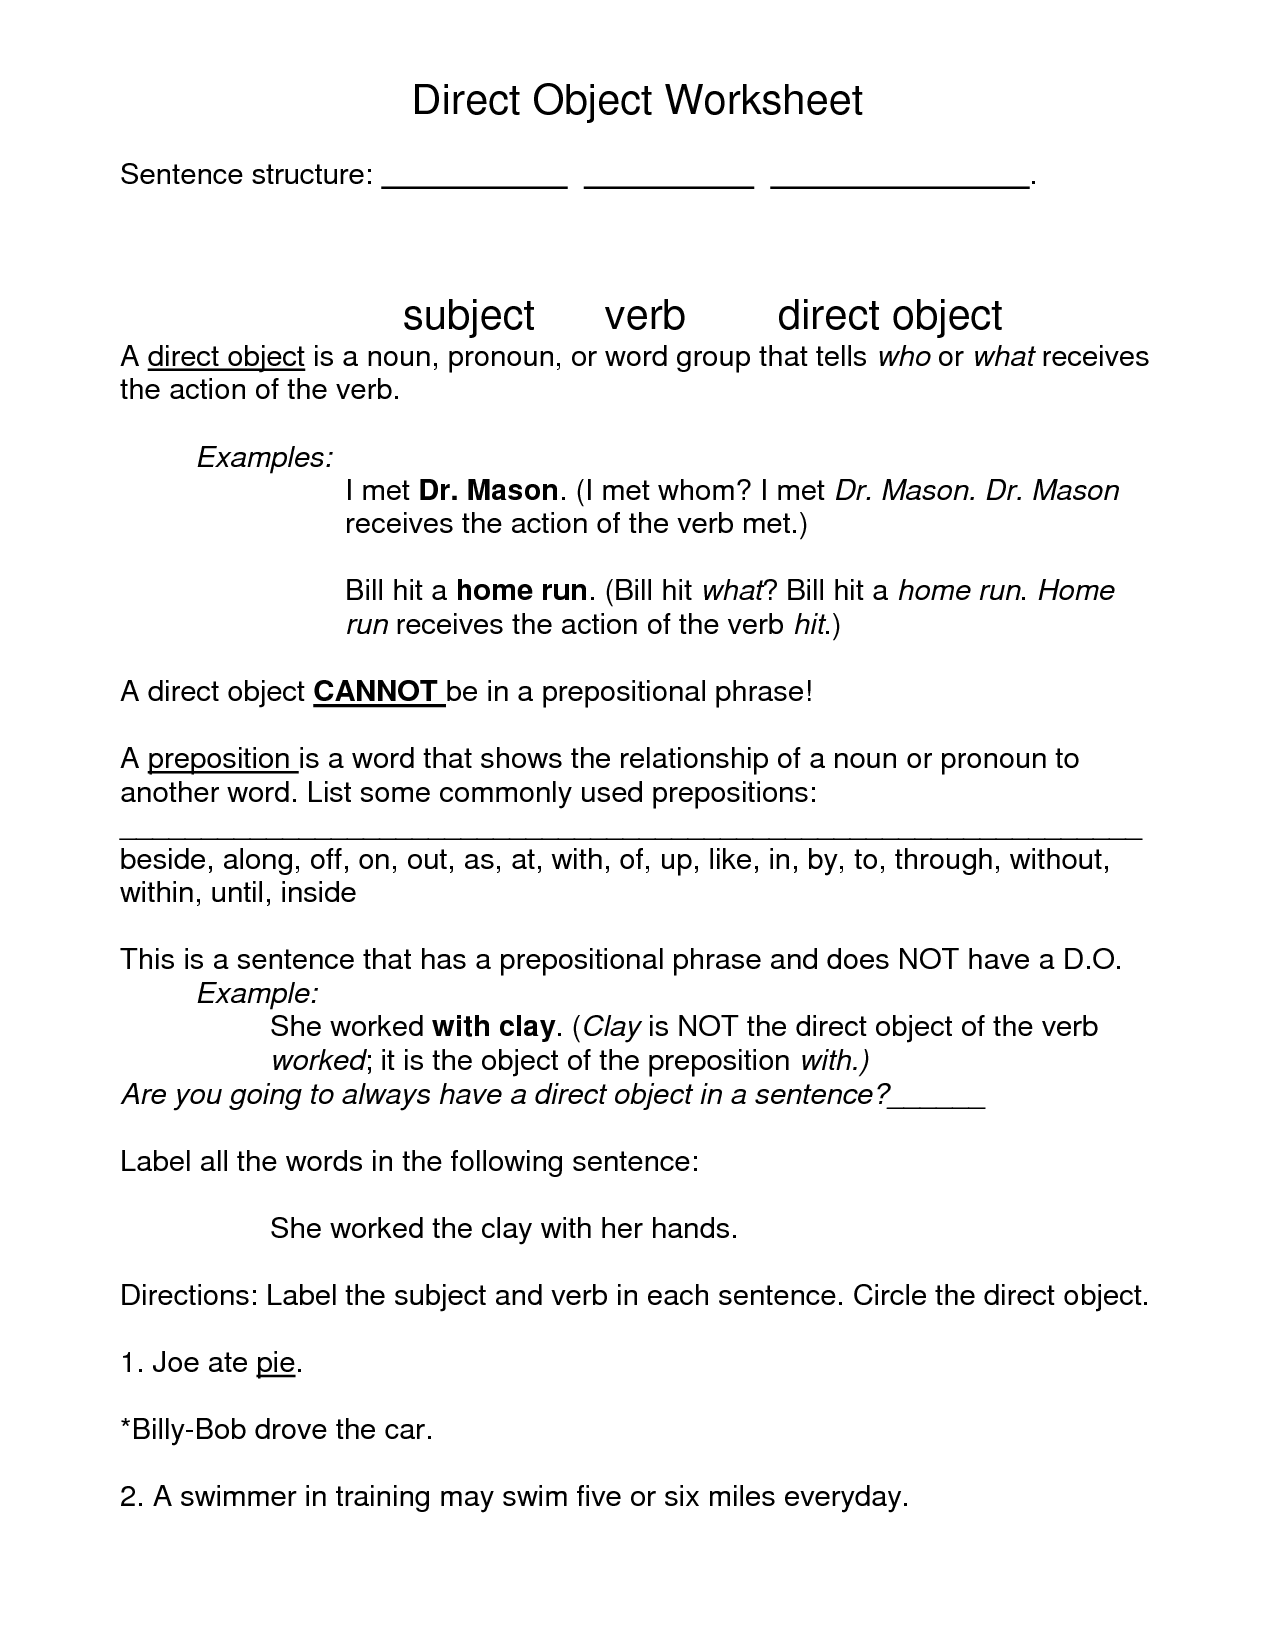 Direct Object Pronouns In Spanish Worksheet Nidecmege